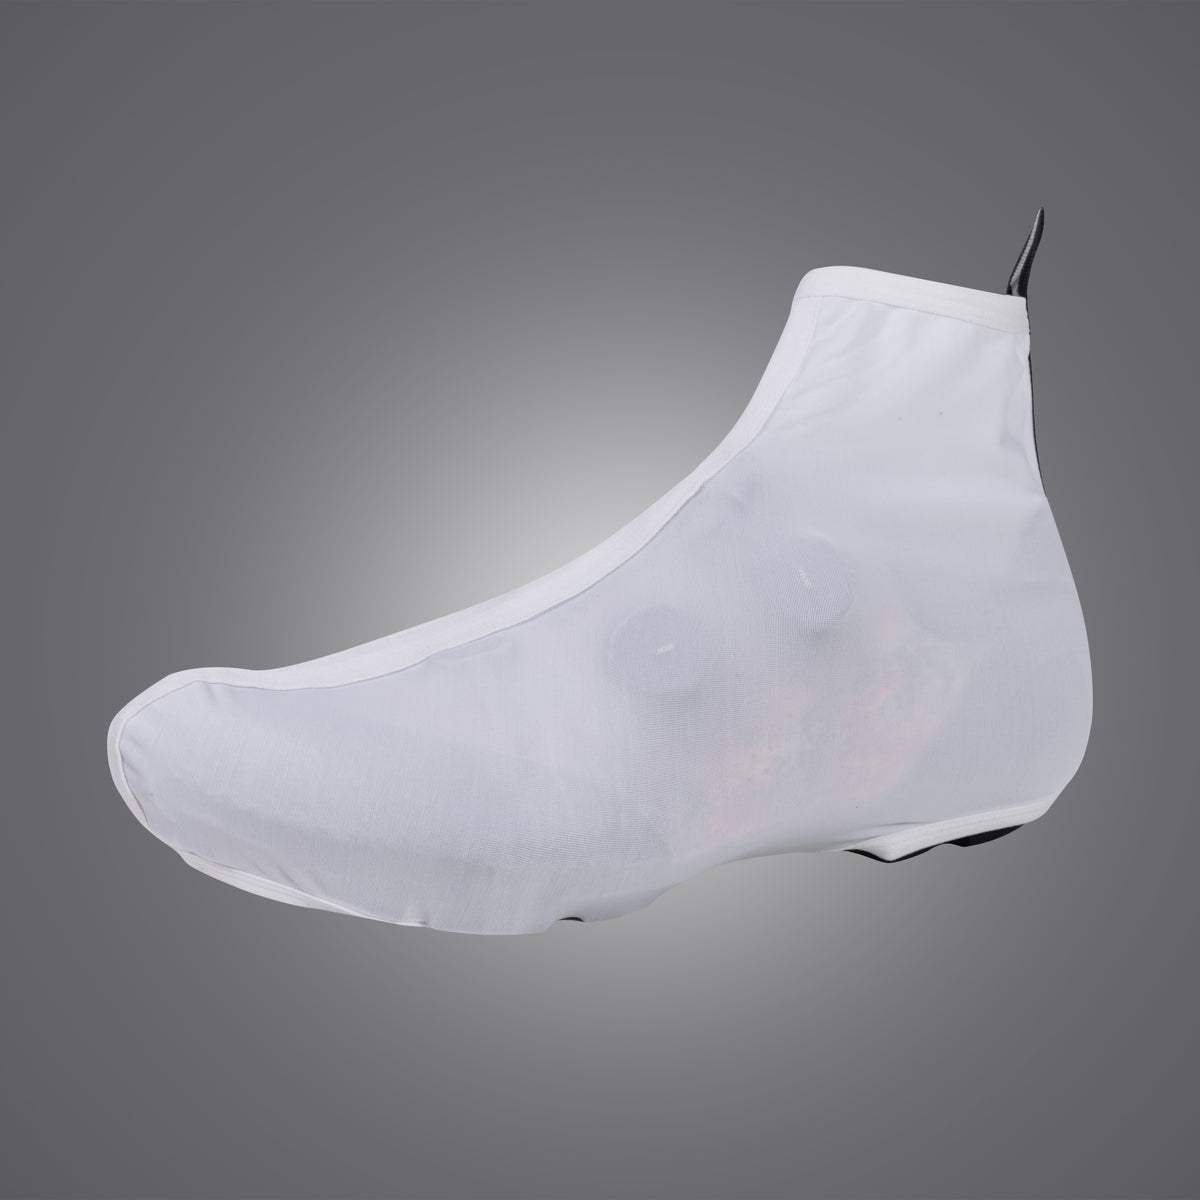 Santic cycling Shoes covers